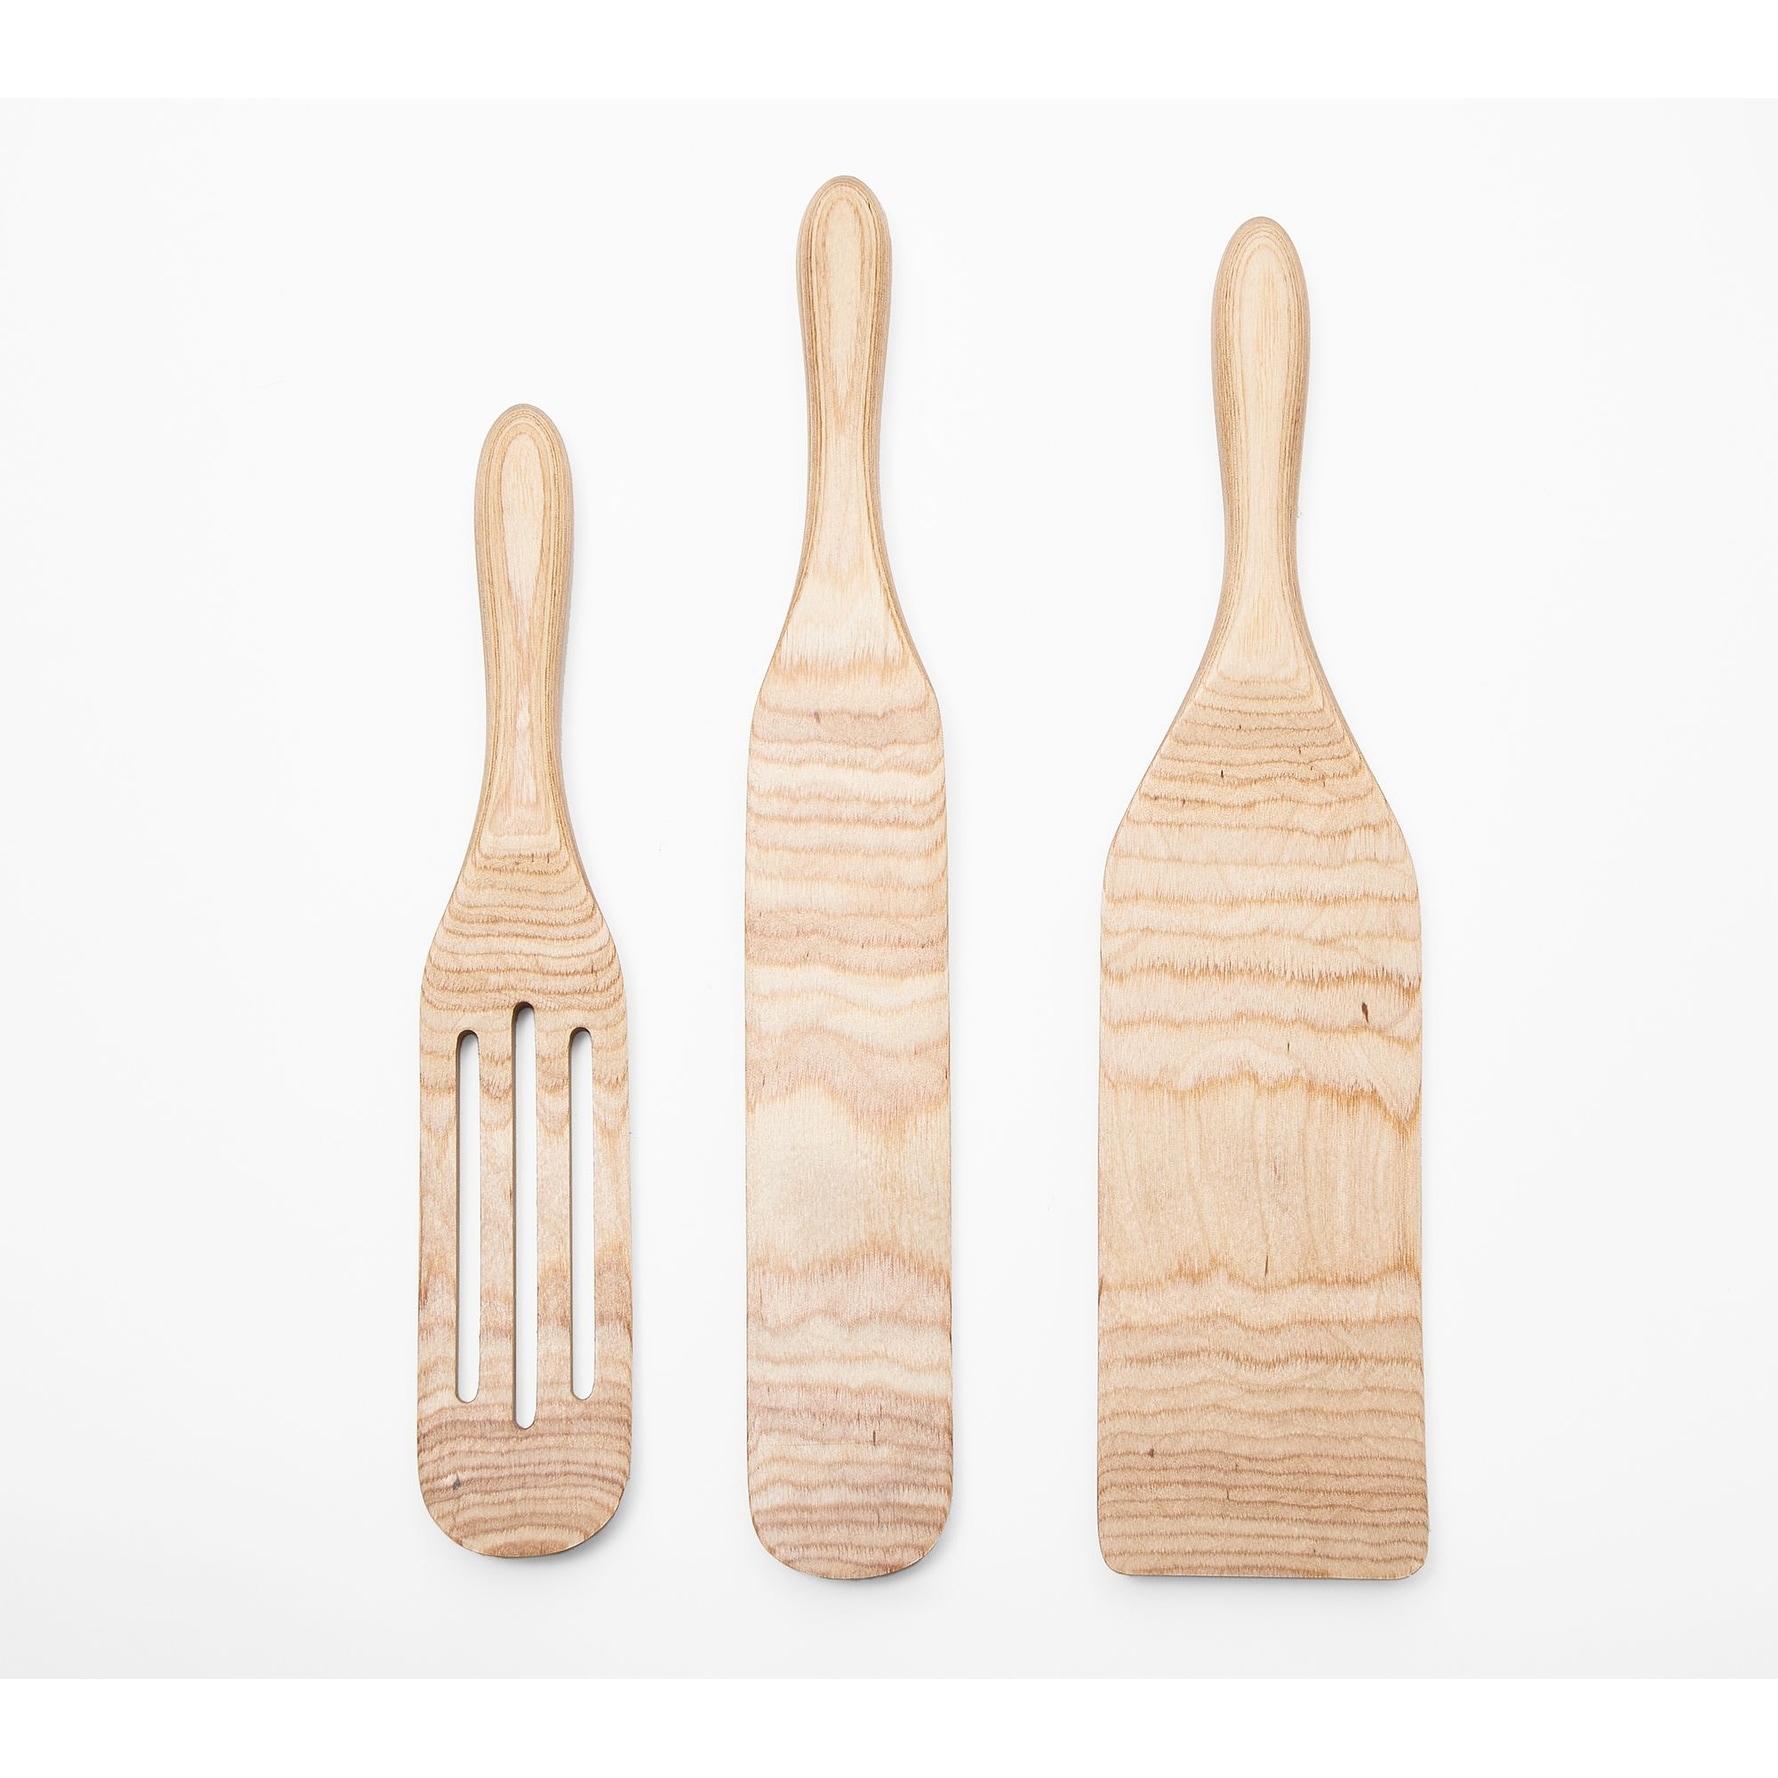 https://ak1.ostkcdn.com/images/products/is/images/direct/4aca137d4713cebe7a8fdb7293c7231d56d49423/Mad-Hungry-3-PC-Pakka-Wood-Spurtle-Set-Model-K48585.jpg